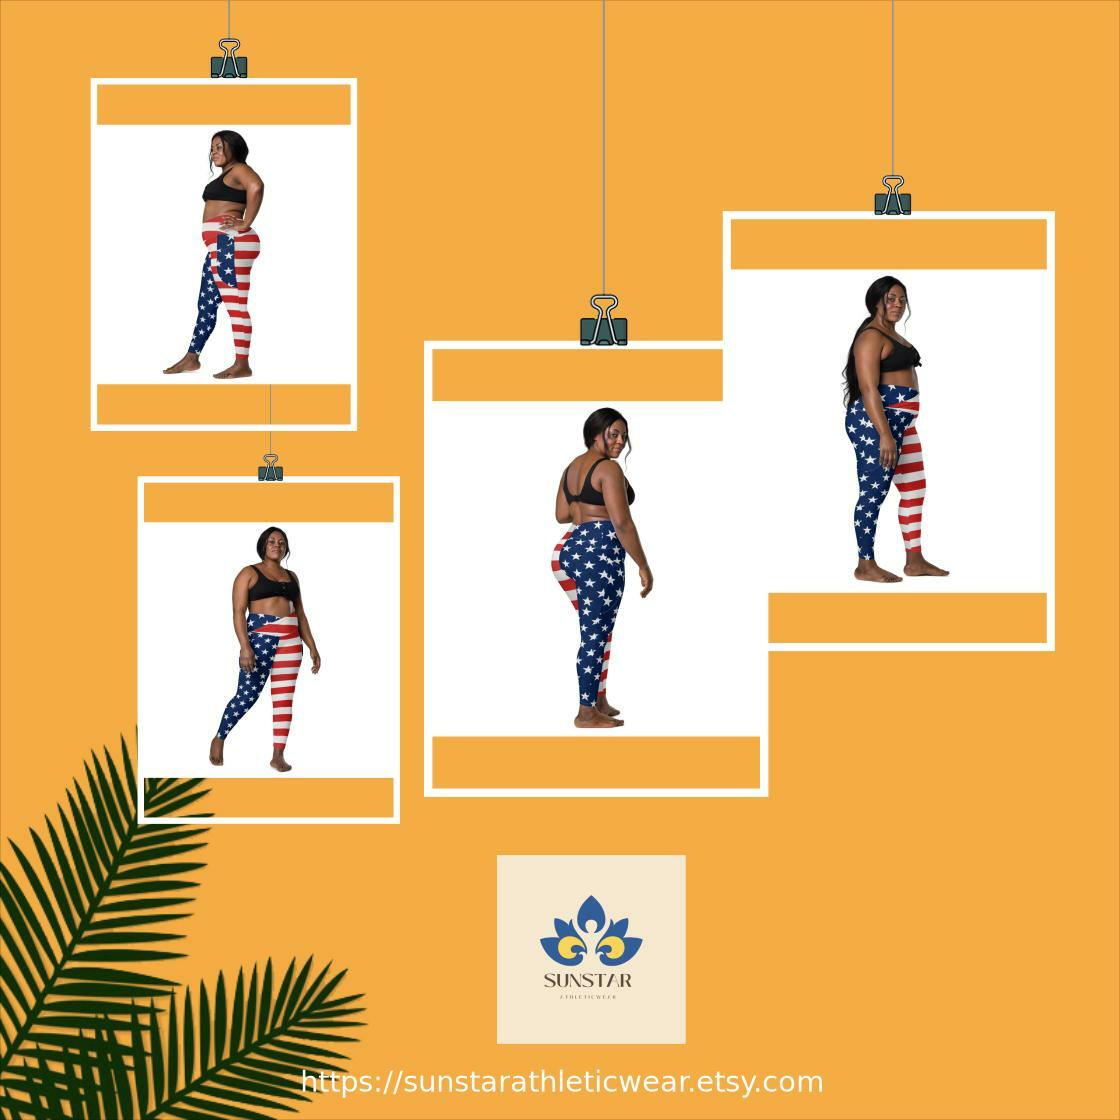 Crossover leggings with pockets,, Proud American Pants, US Patriotic Stars, USA Flag Plus Size Leggings #WomensClothing #Clothing 
$75.00
➤ etsy.me/44xYUBv